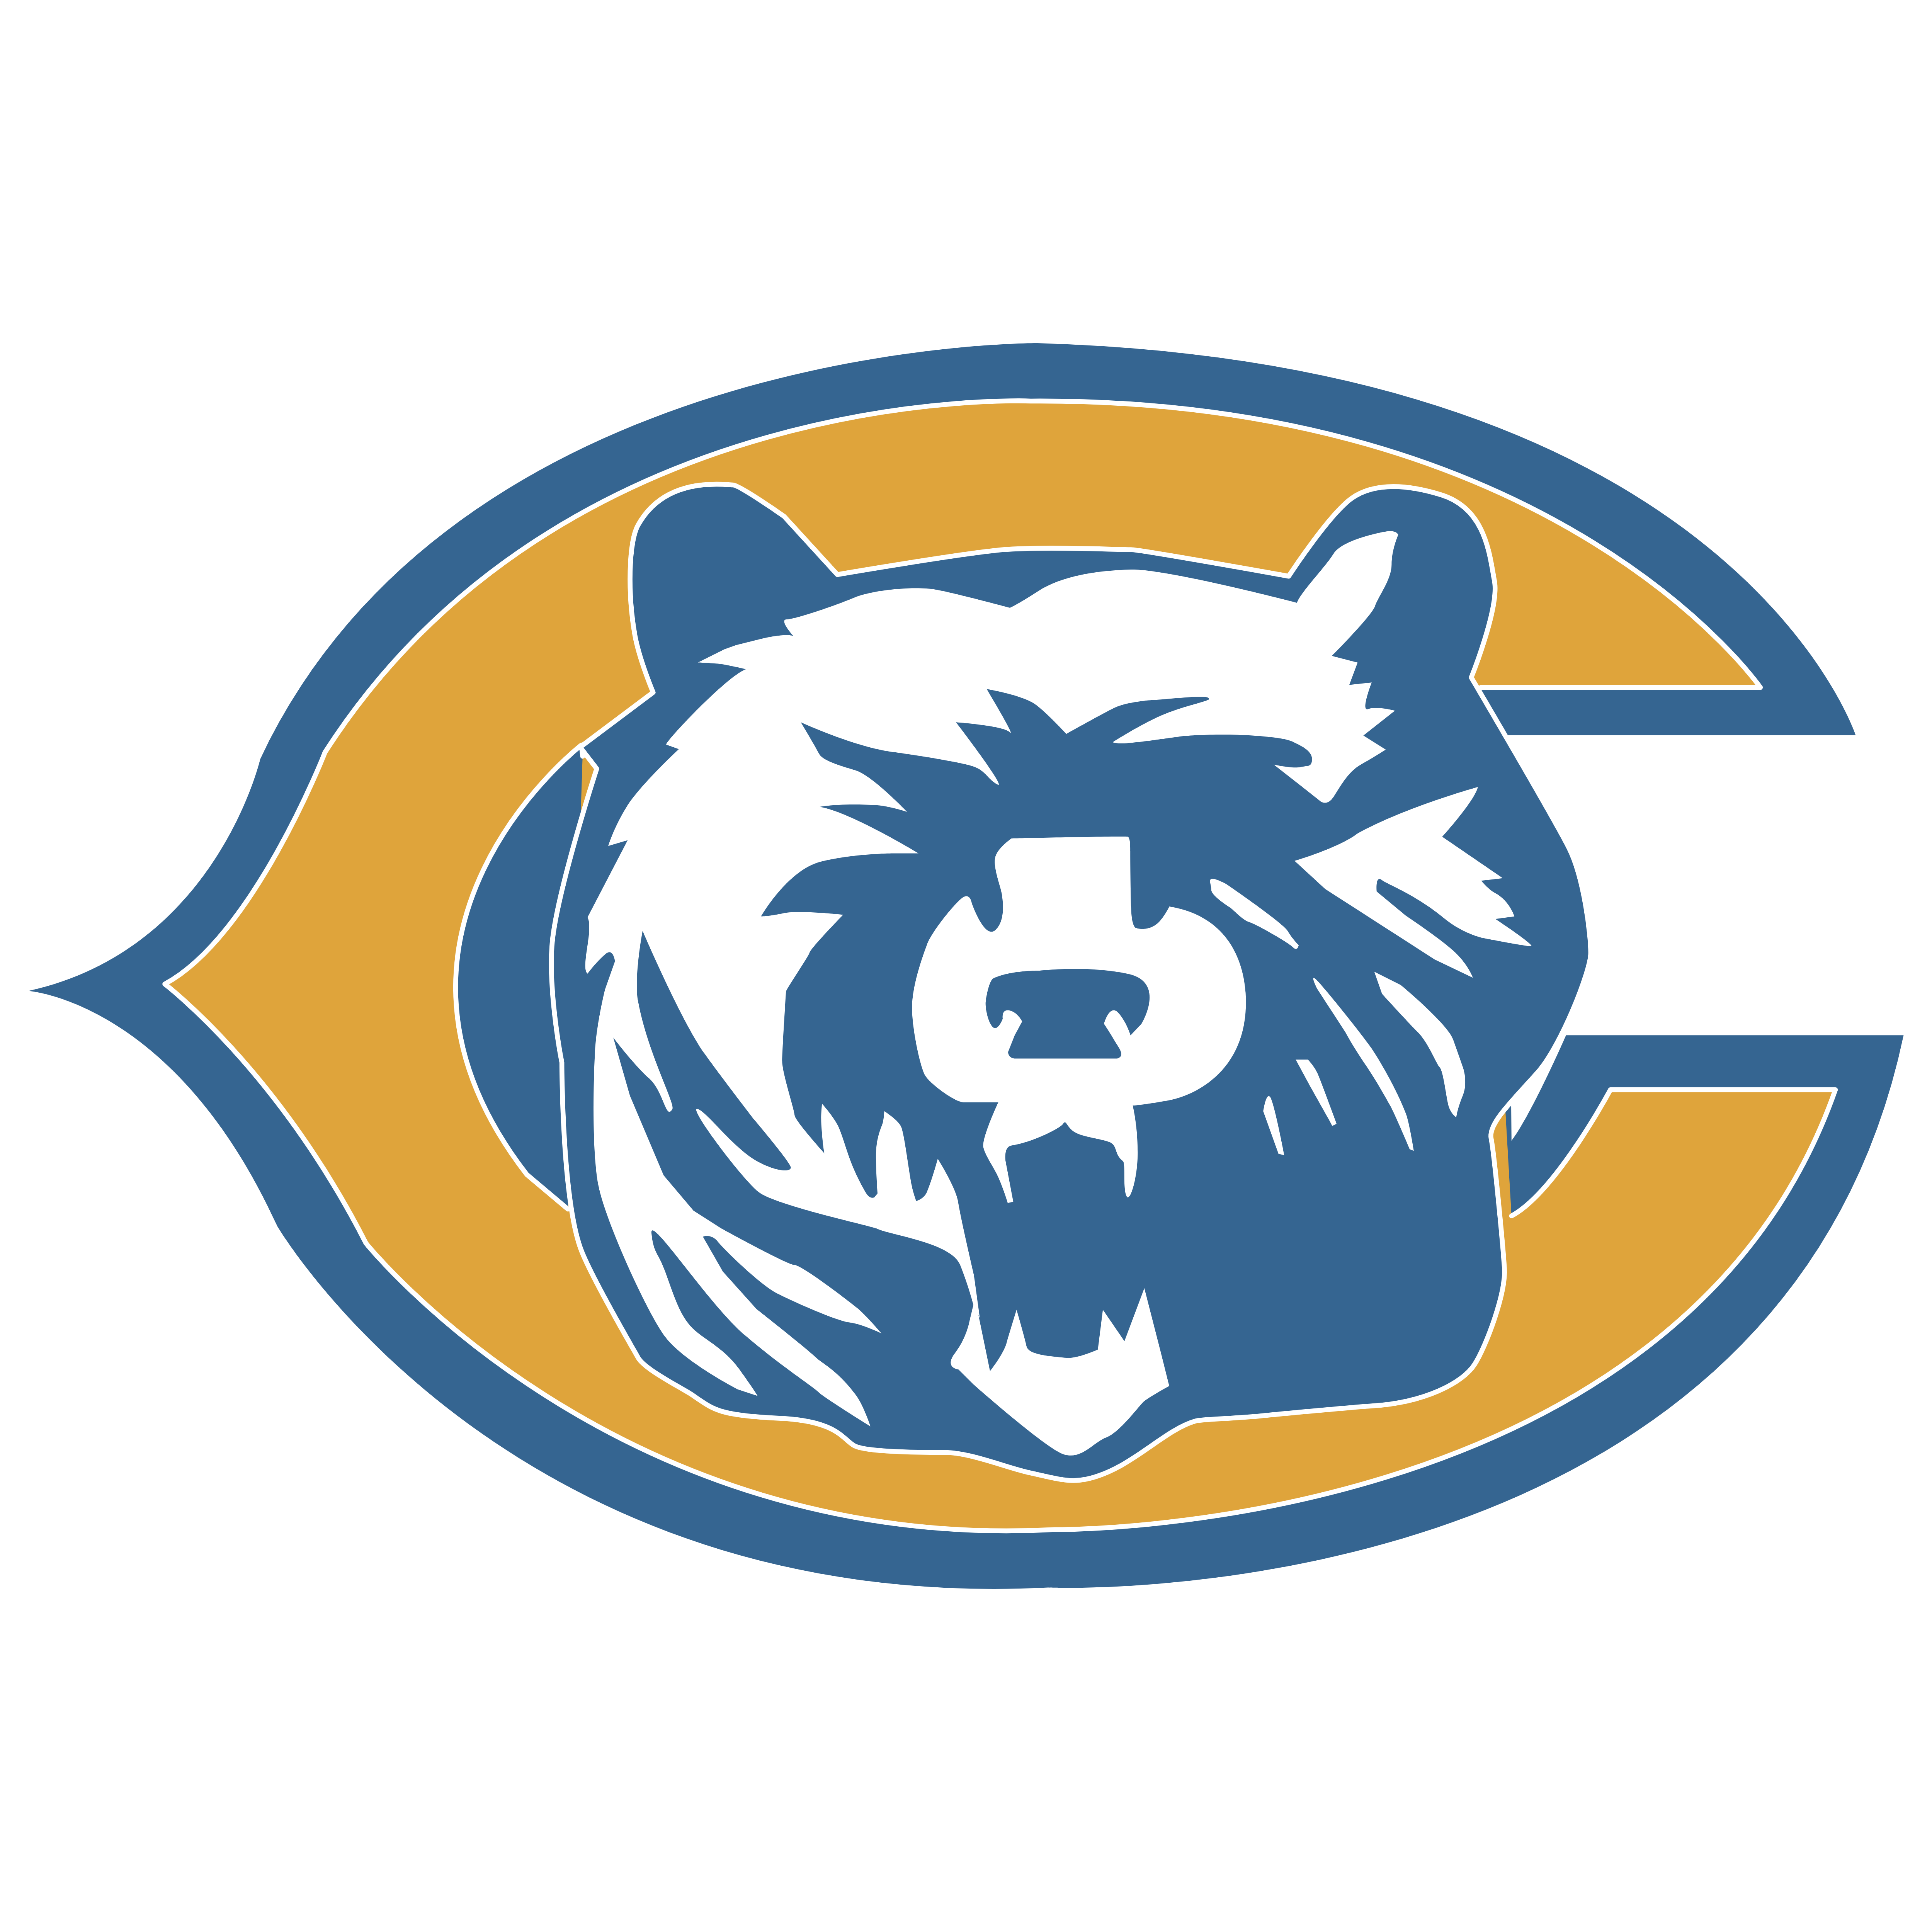 Chicago Bears Logo PNG - 176336